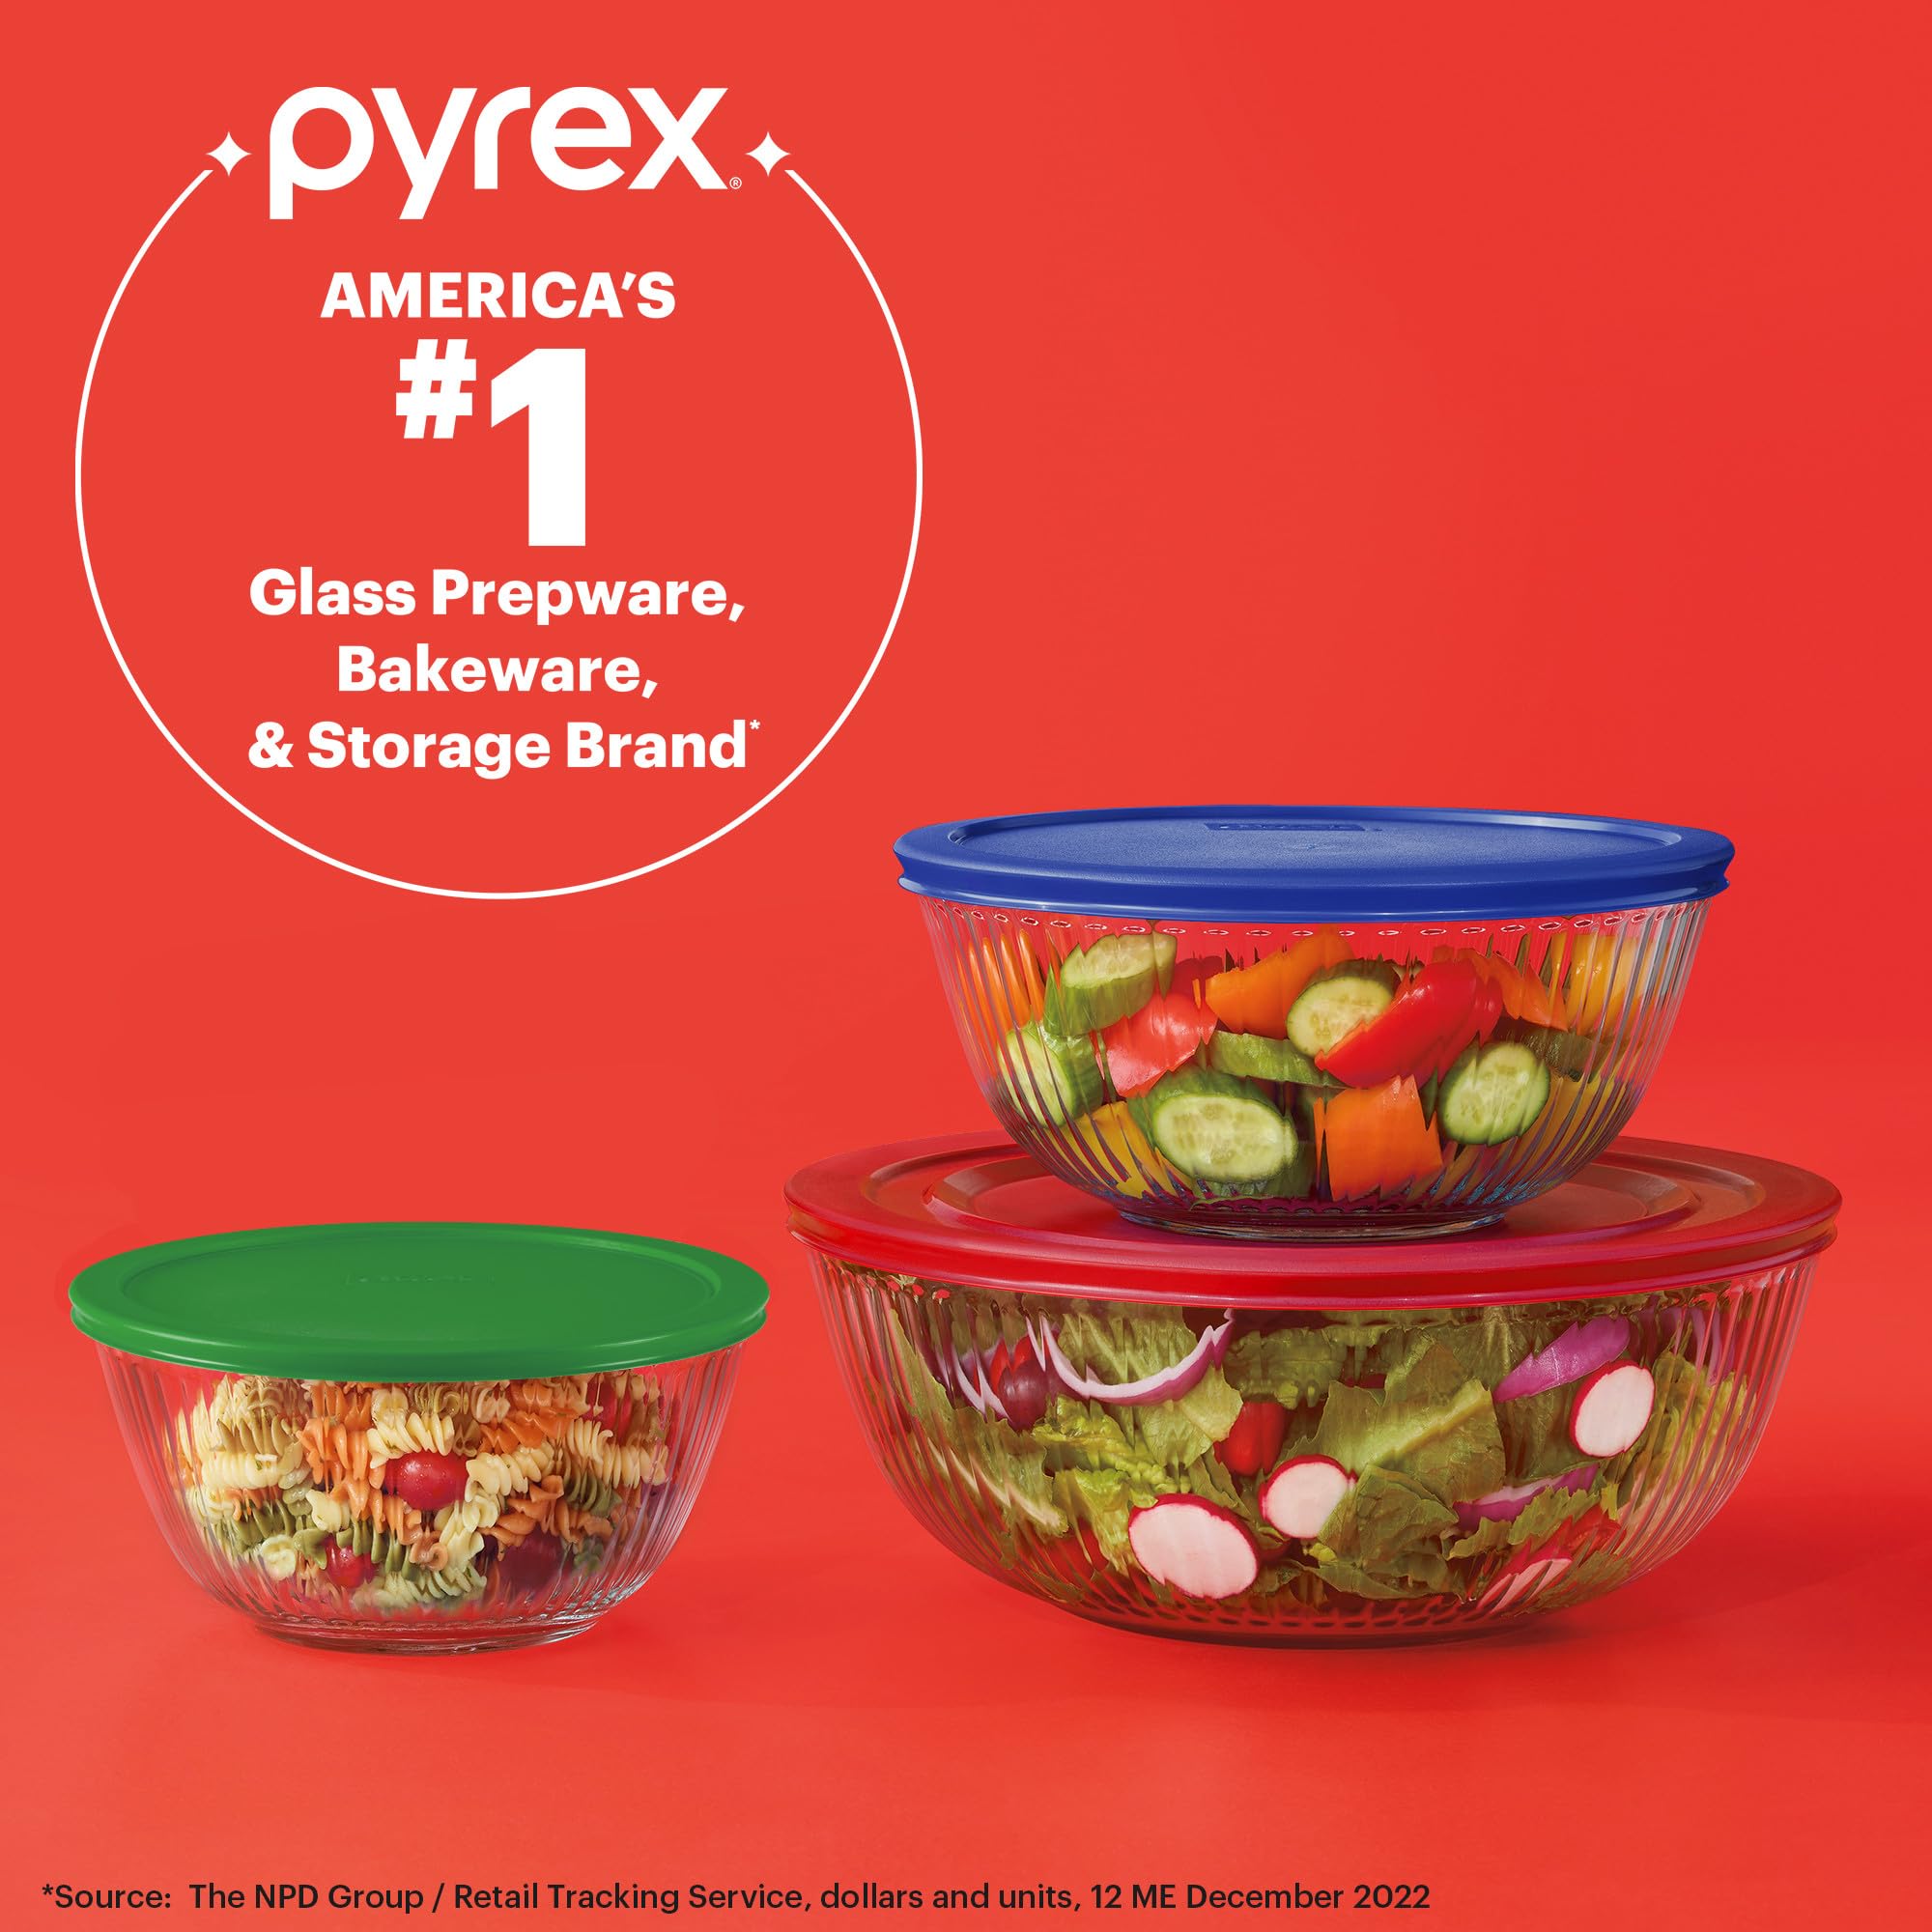 Pyrex Sculpted Large 6-Piece Glass Mixing Bowls, 1.3 QT, 2.3 QT, and 4.5 QT Prepping and Baking Food Storage Set, Dishwasher, Microwave and Freezer Safe